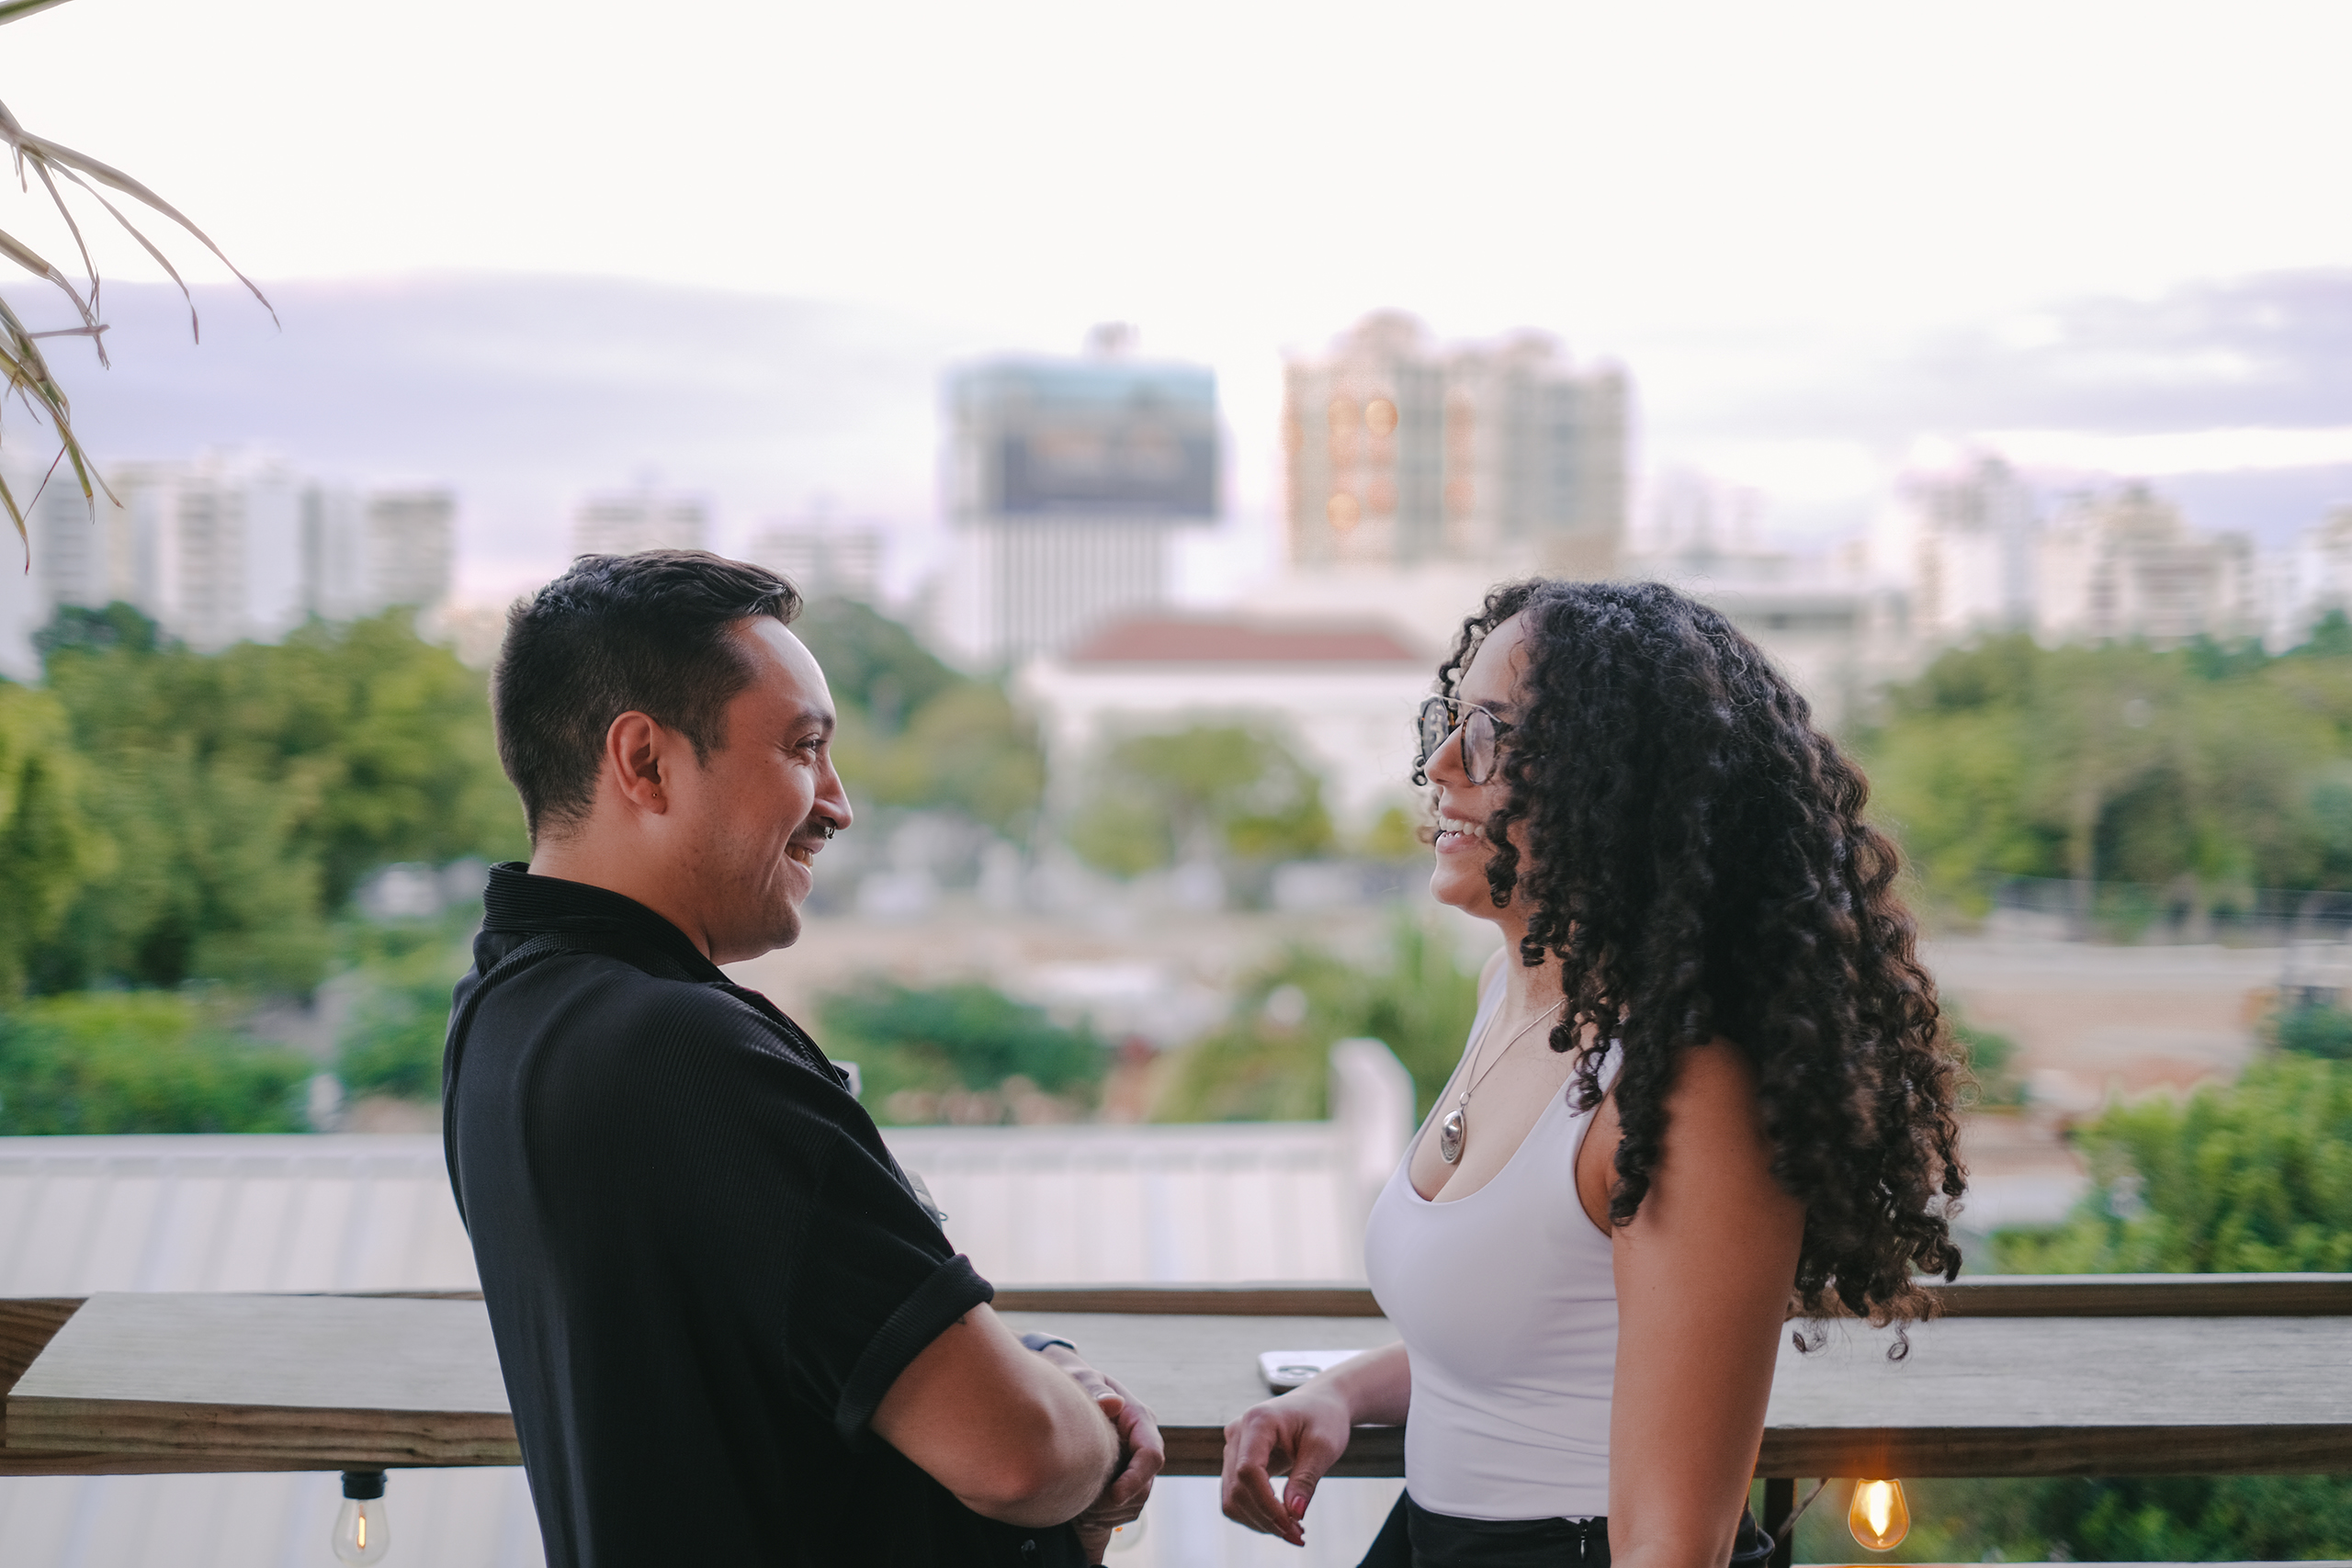 Candid photo of Salem Acuna-Vasquez & Claribel Vidal laughing together with Puerto Rico’s skyline in the background